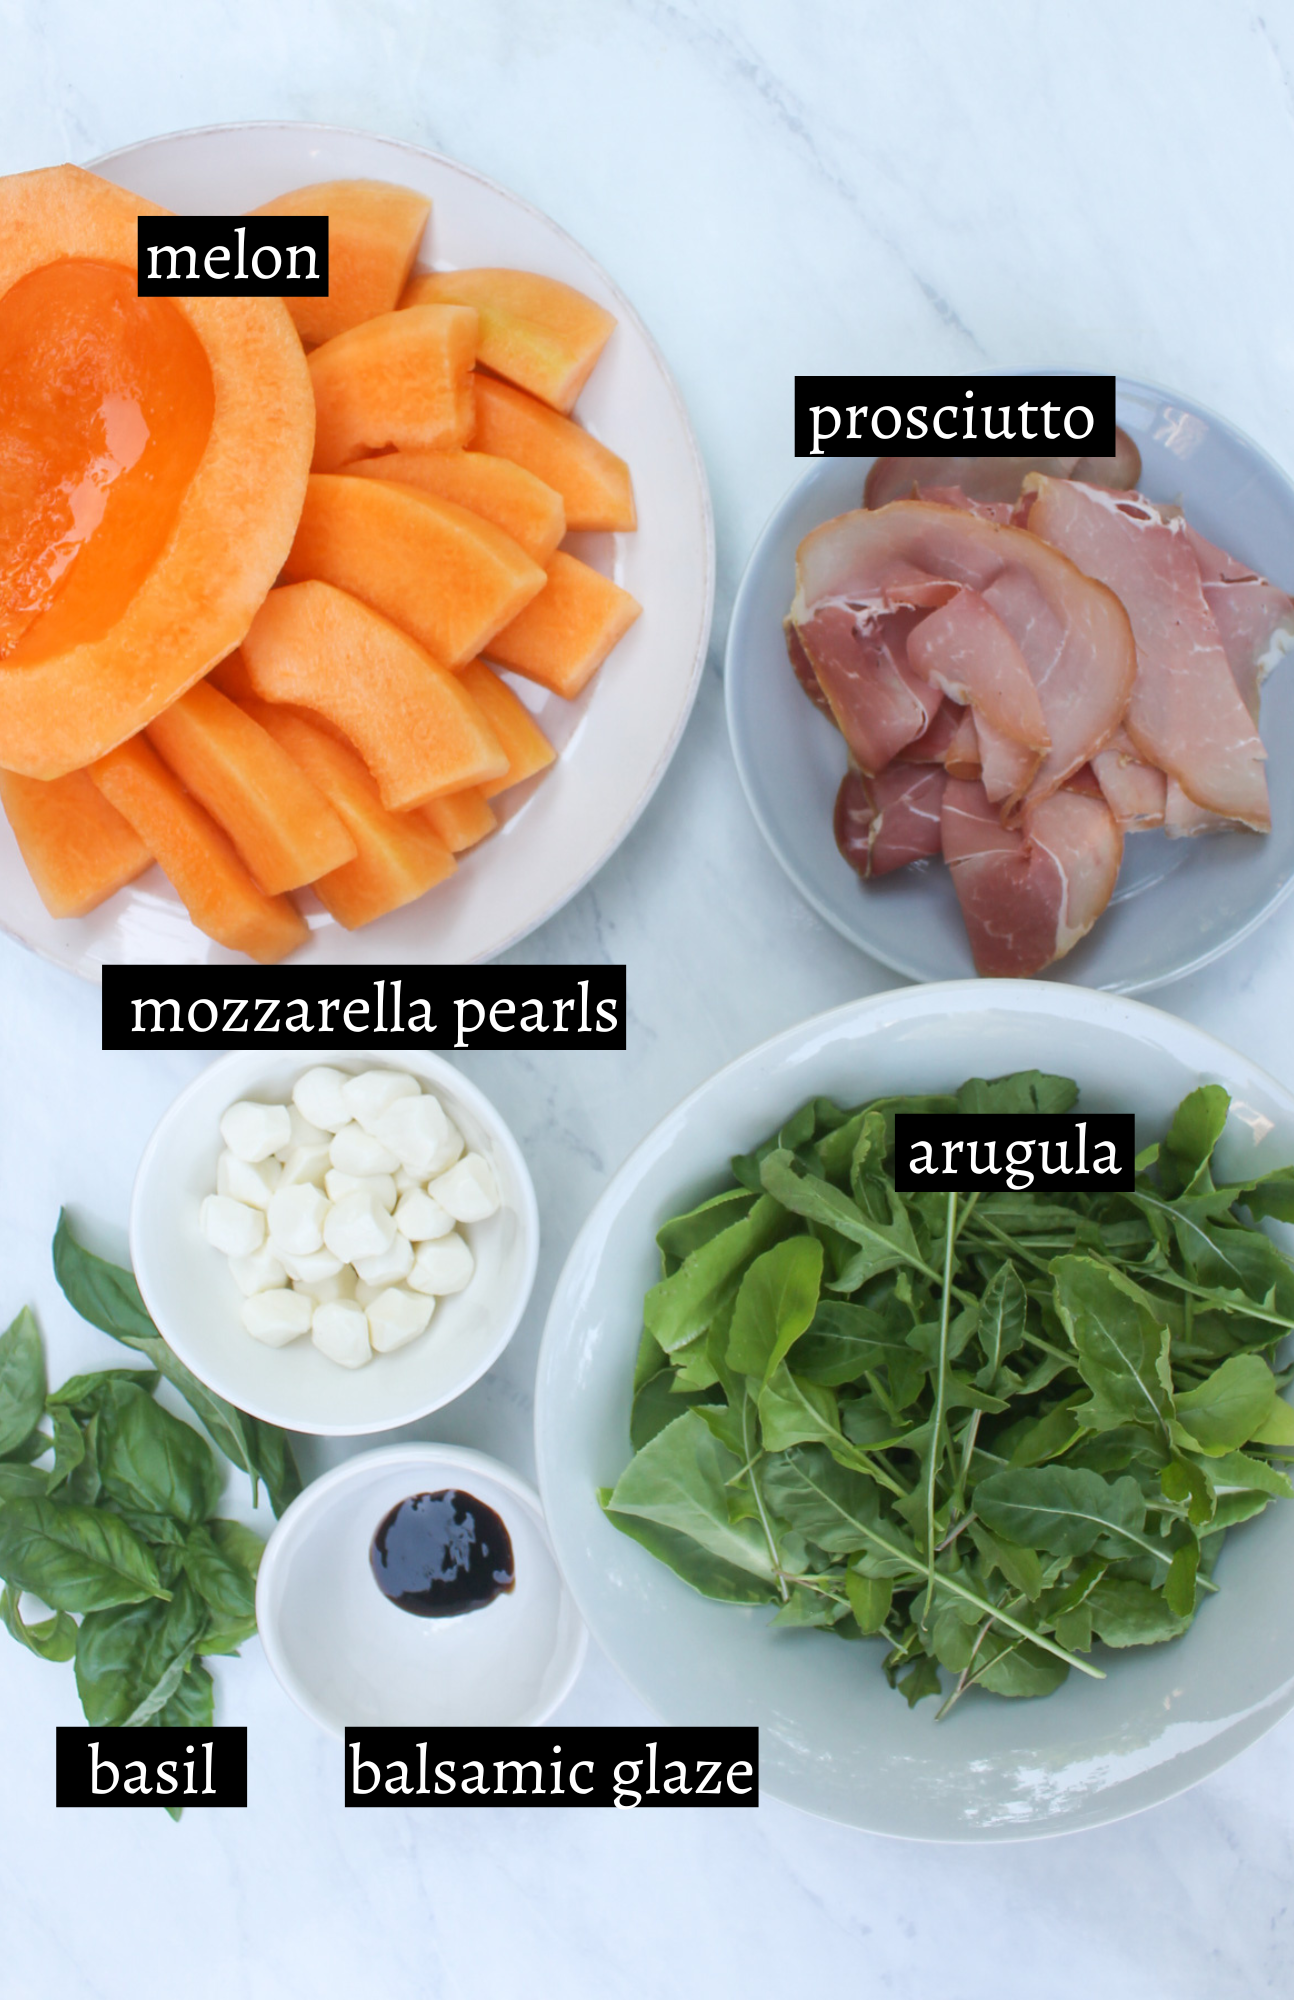 Labeled ingredients for melon prosciutto salad with mozzarella and basil.